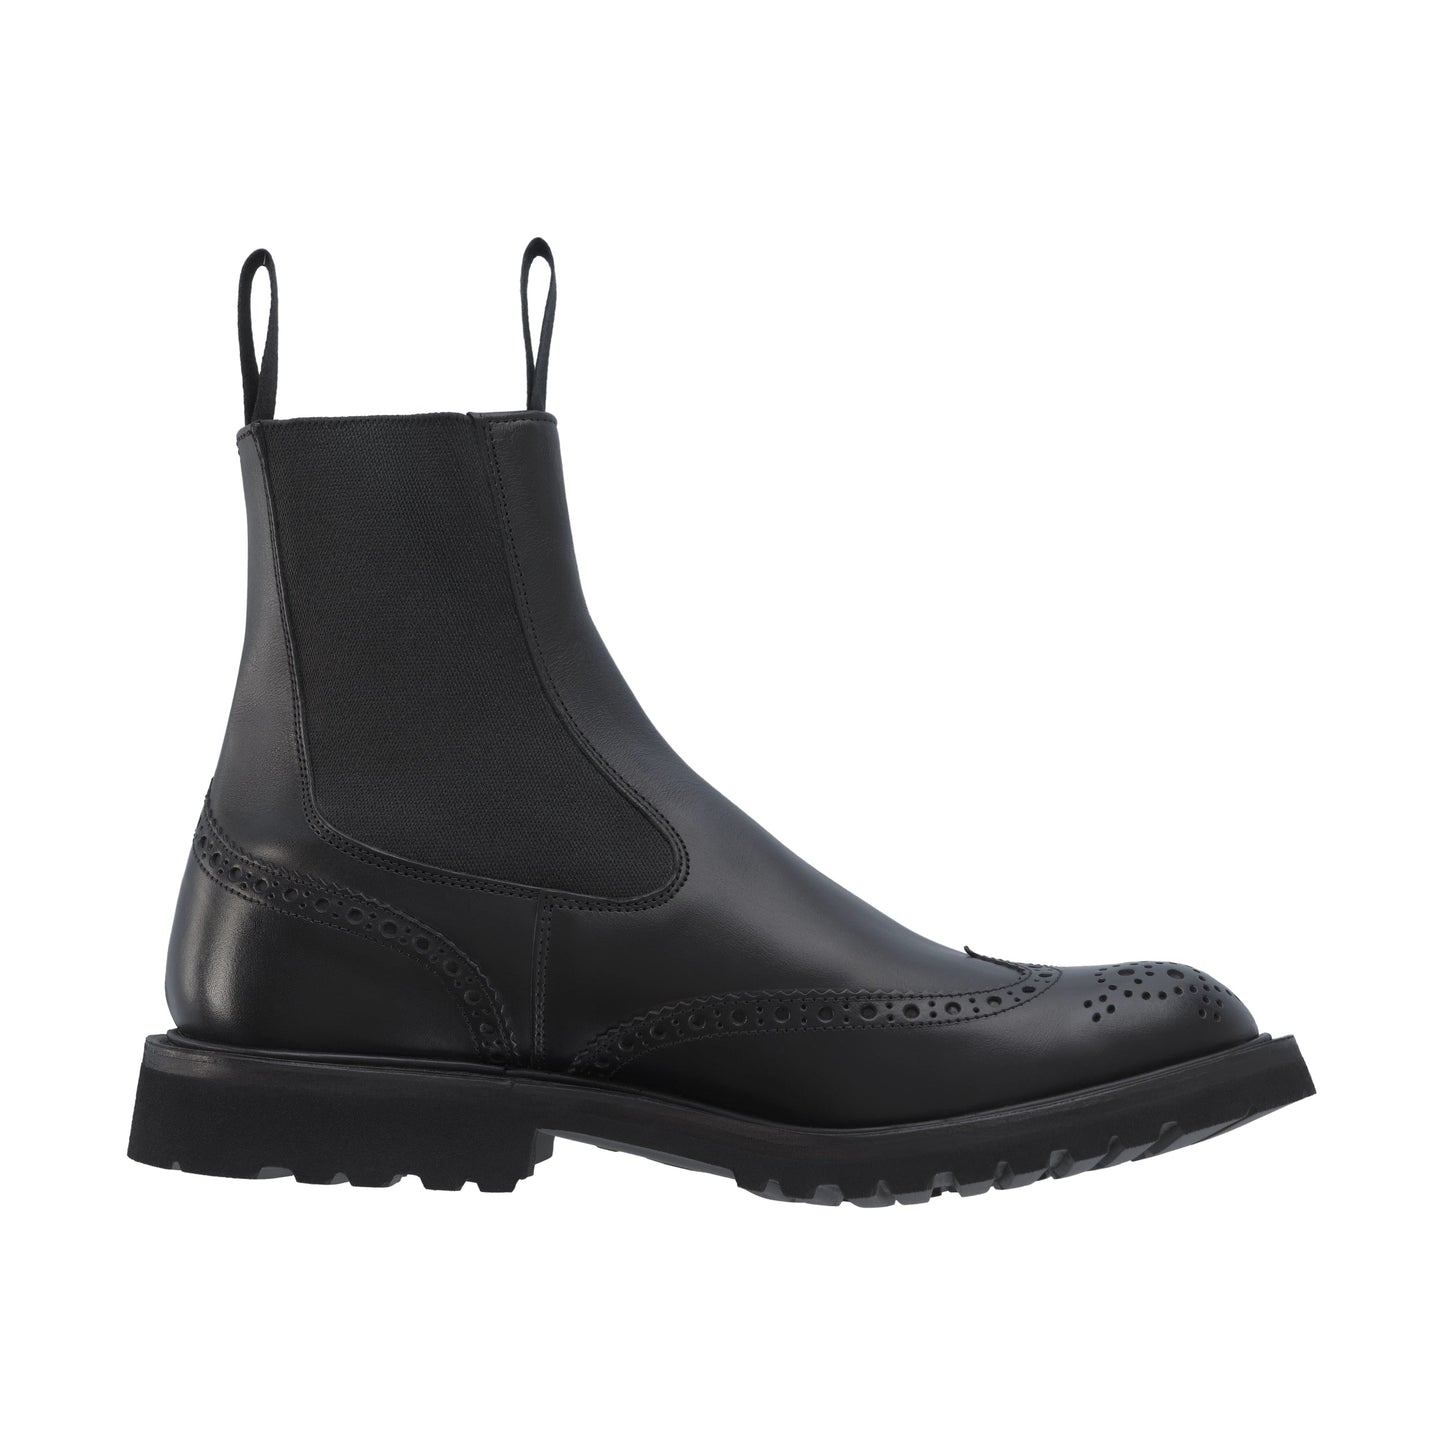 Tricker's "Henry" Leather Slip - On Chelsea Boots in Black - SARTALE